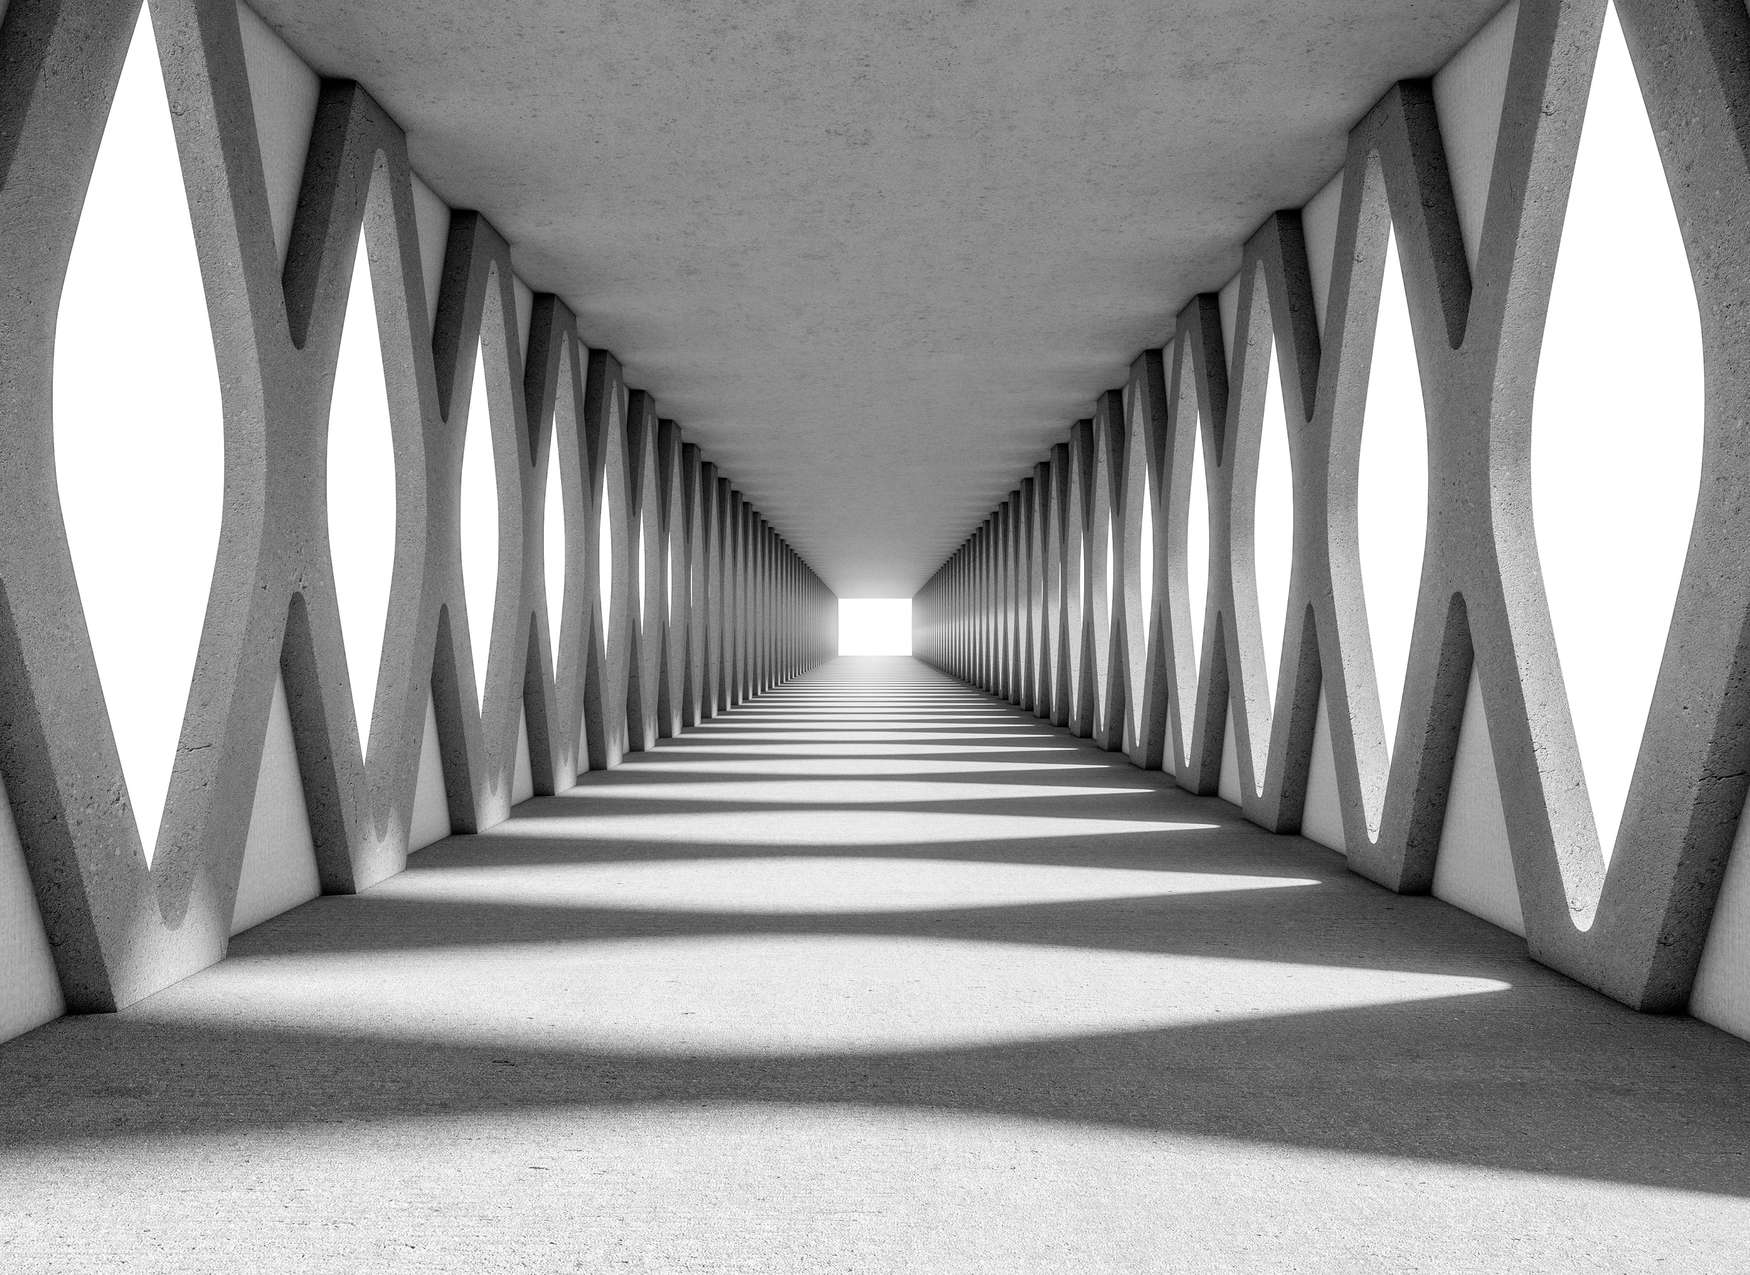             Concrete aisle with 3D look - Grey, White
        